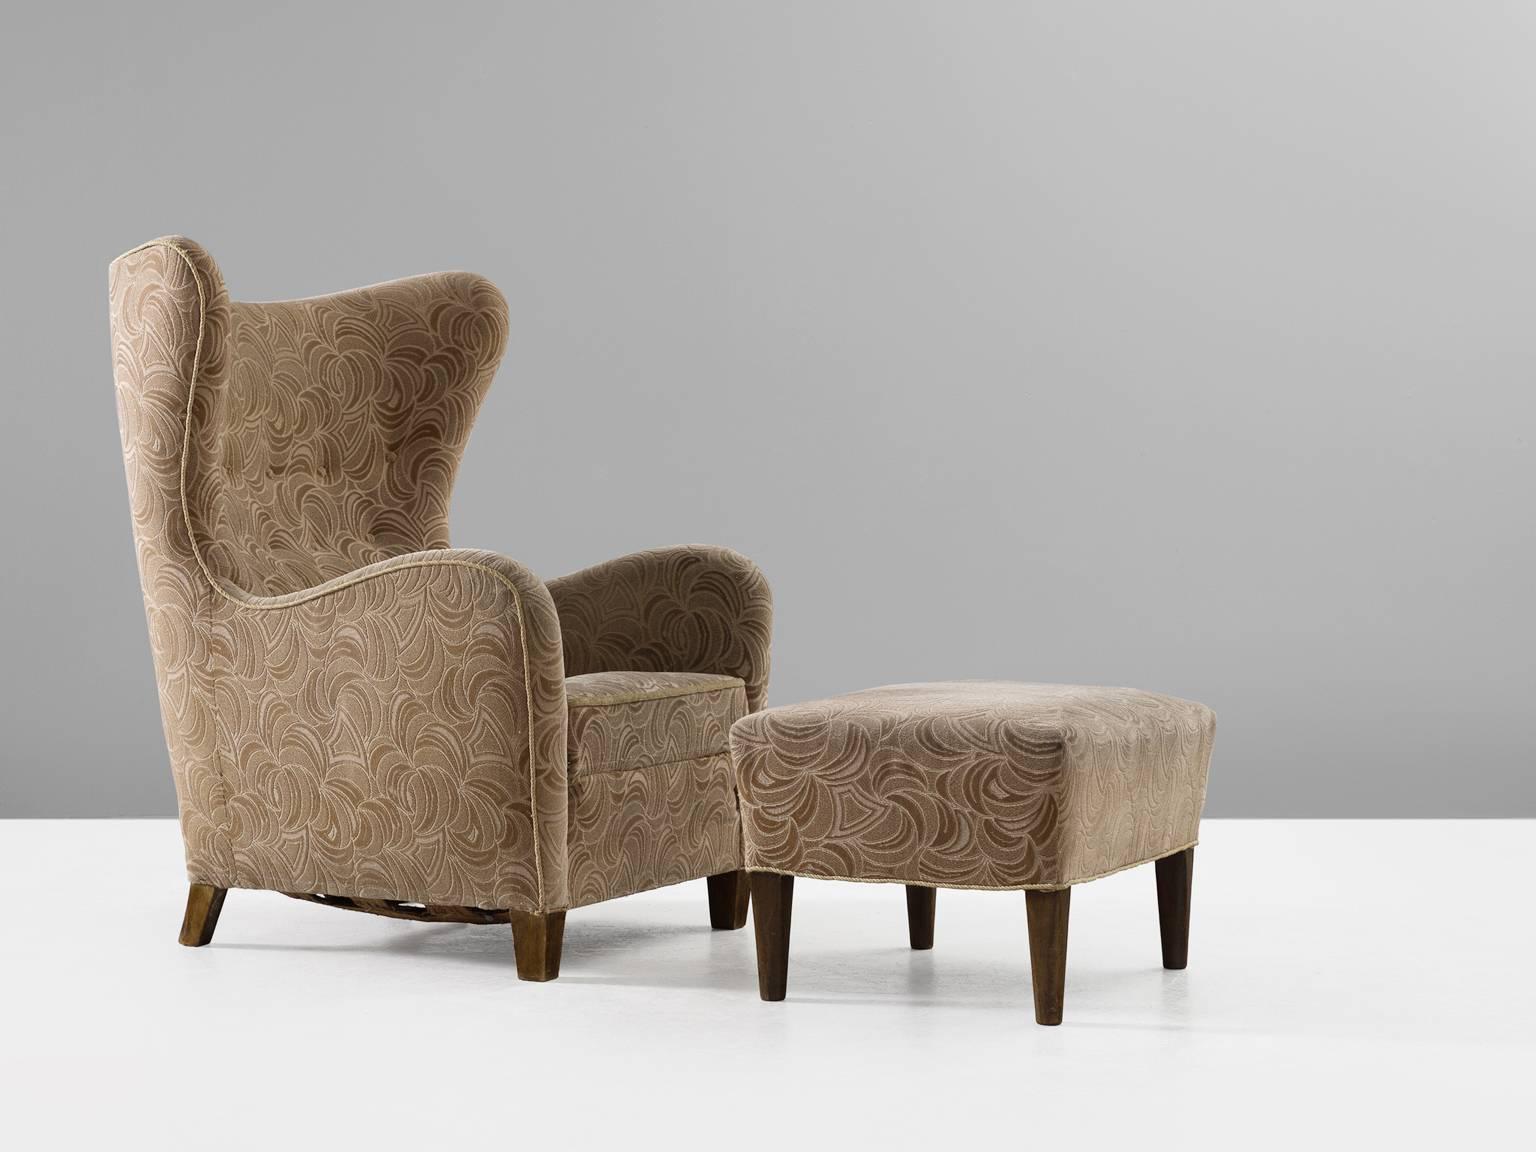 Wingback chair, in oak and fabric, for Thorald Matsen jr. for Thorald Madsen Snedkeri, Denmark, 1942. 

Classical high back chair, with beautiful tufted back. The chair is combined with a matching ottoman which makes this a rare find. The design for